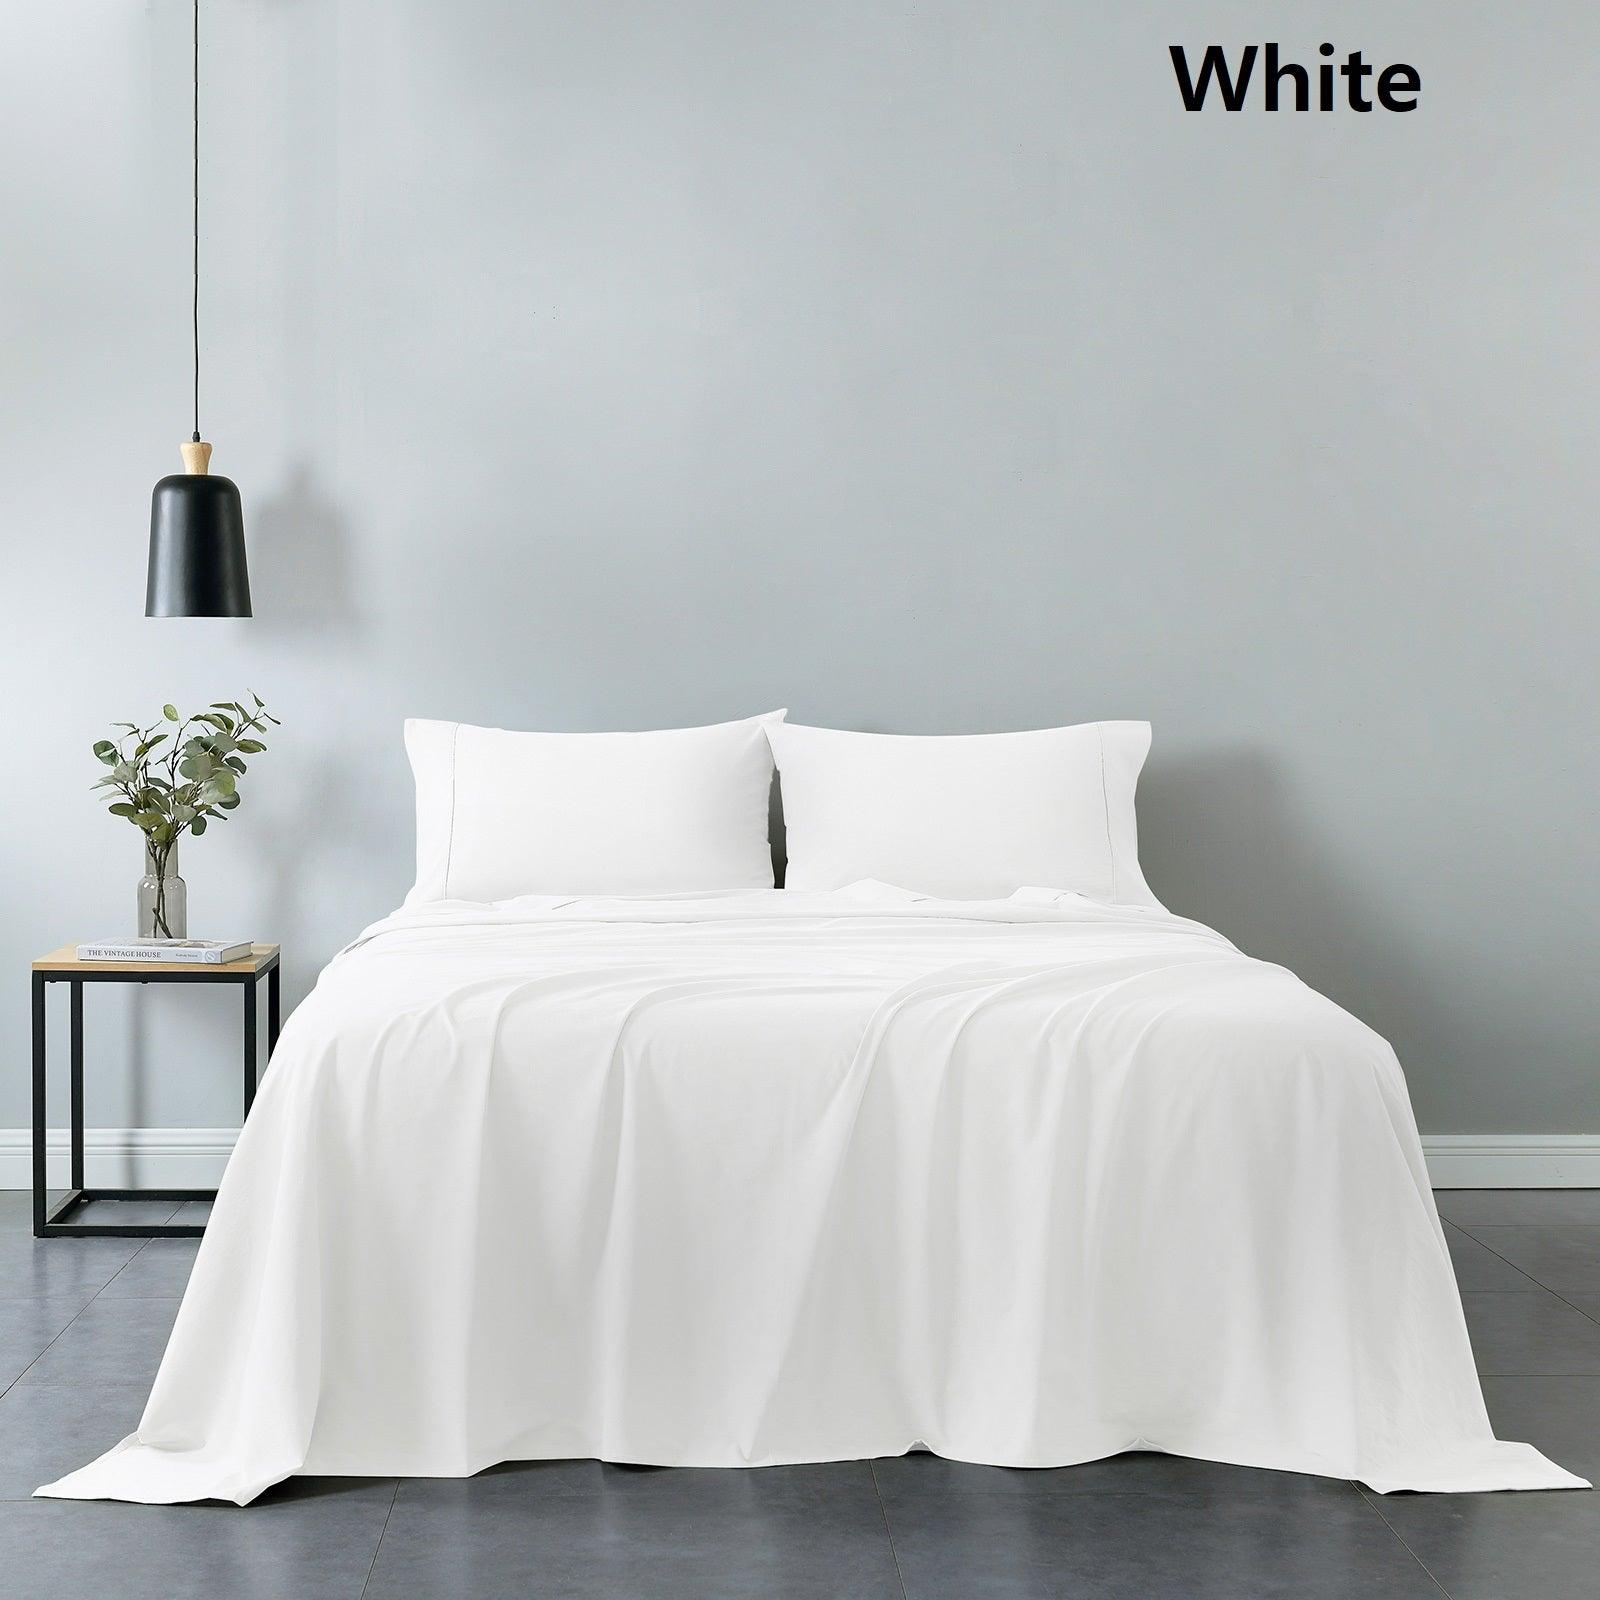 Royal Comfort Vintage Washed 100% Cotton Sheet Set Fitted Flat Sheet Pillowcases - Single - White